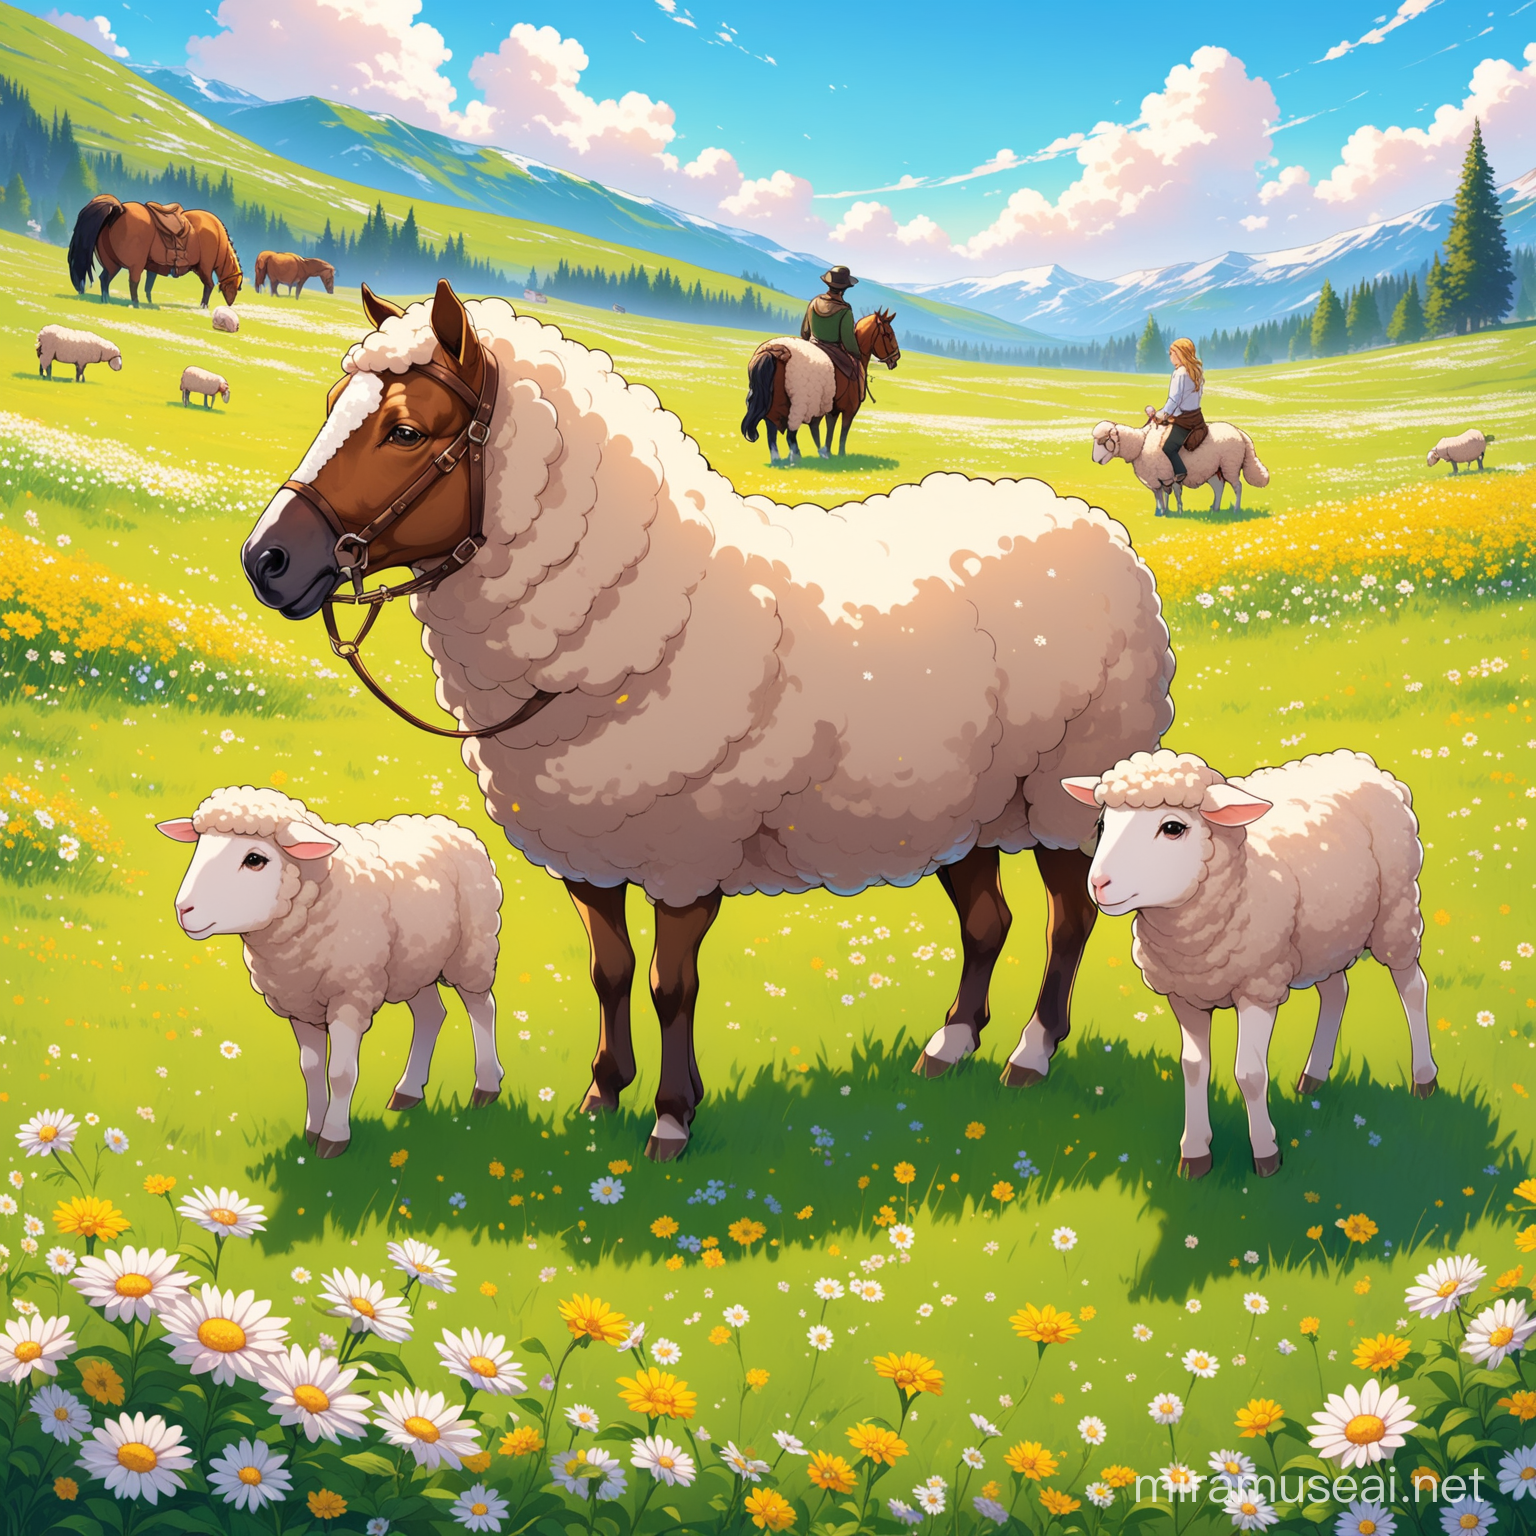 A sheep with two horses around it and lots of flowers in the meadow, as well as Eduard and his semi-girlfriend.